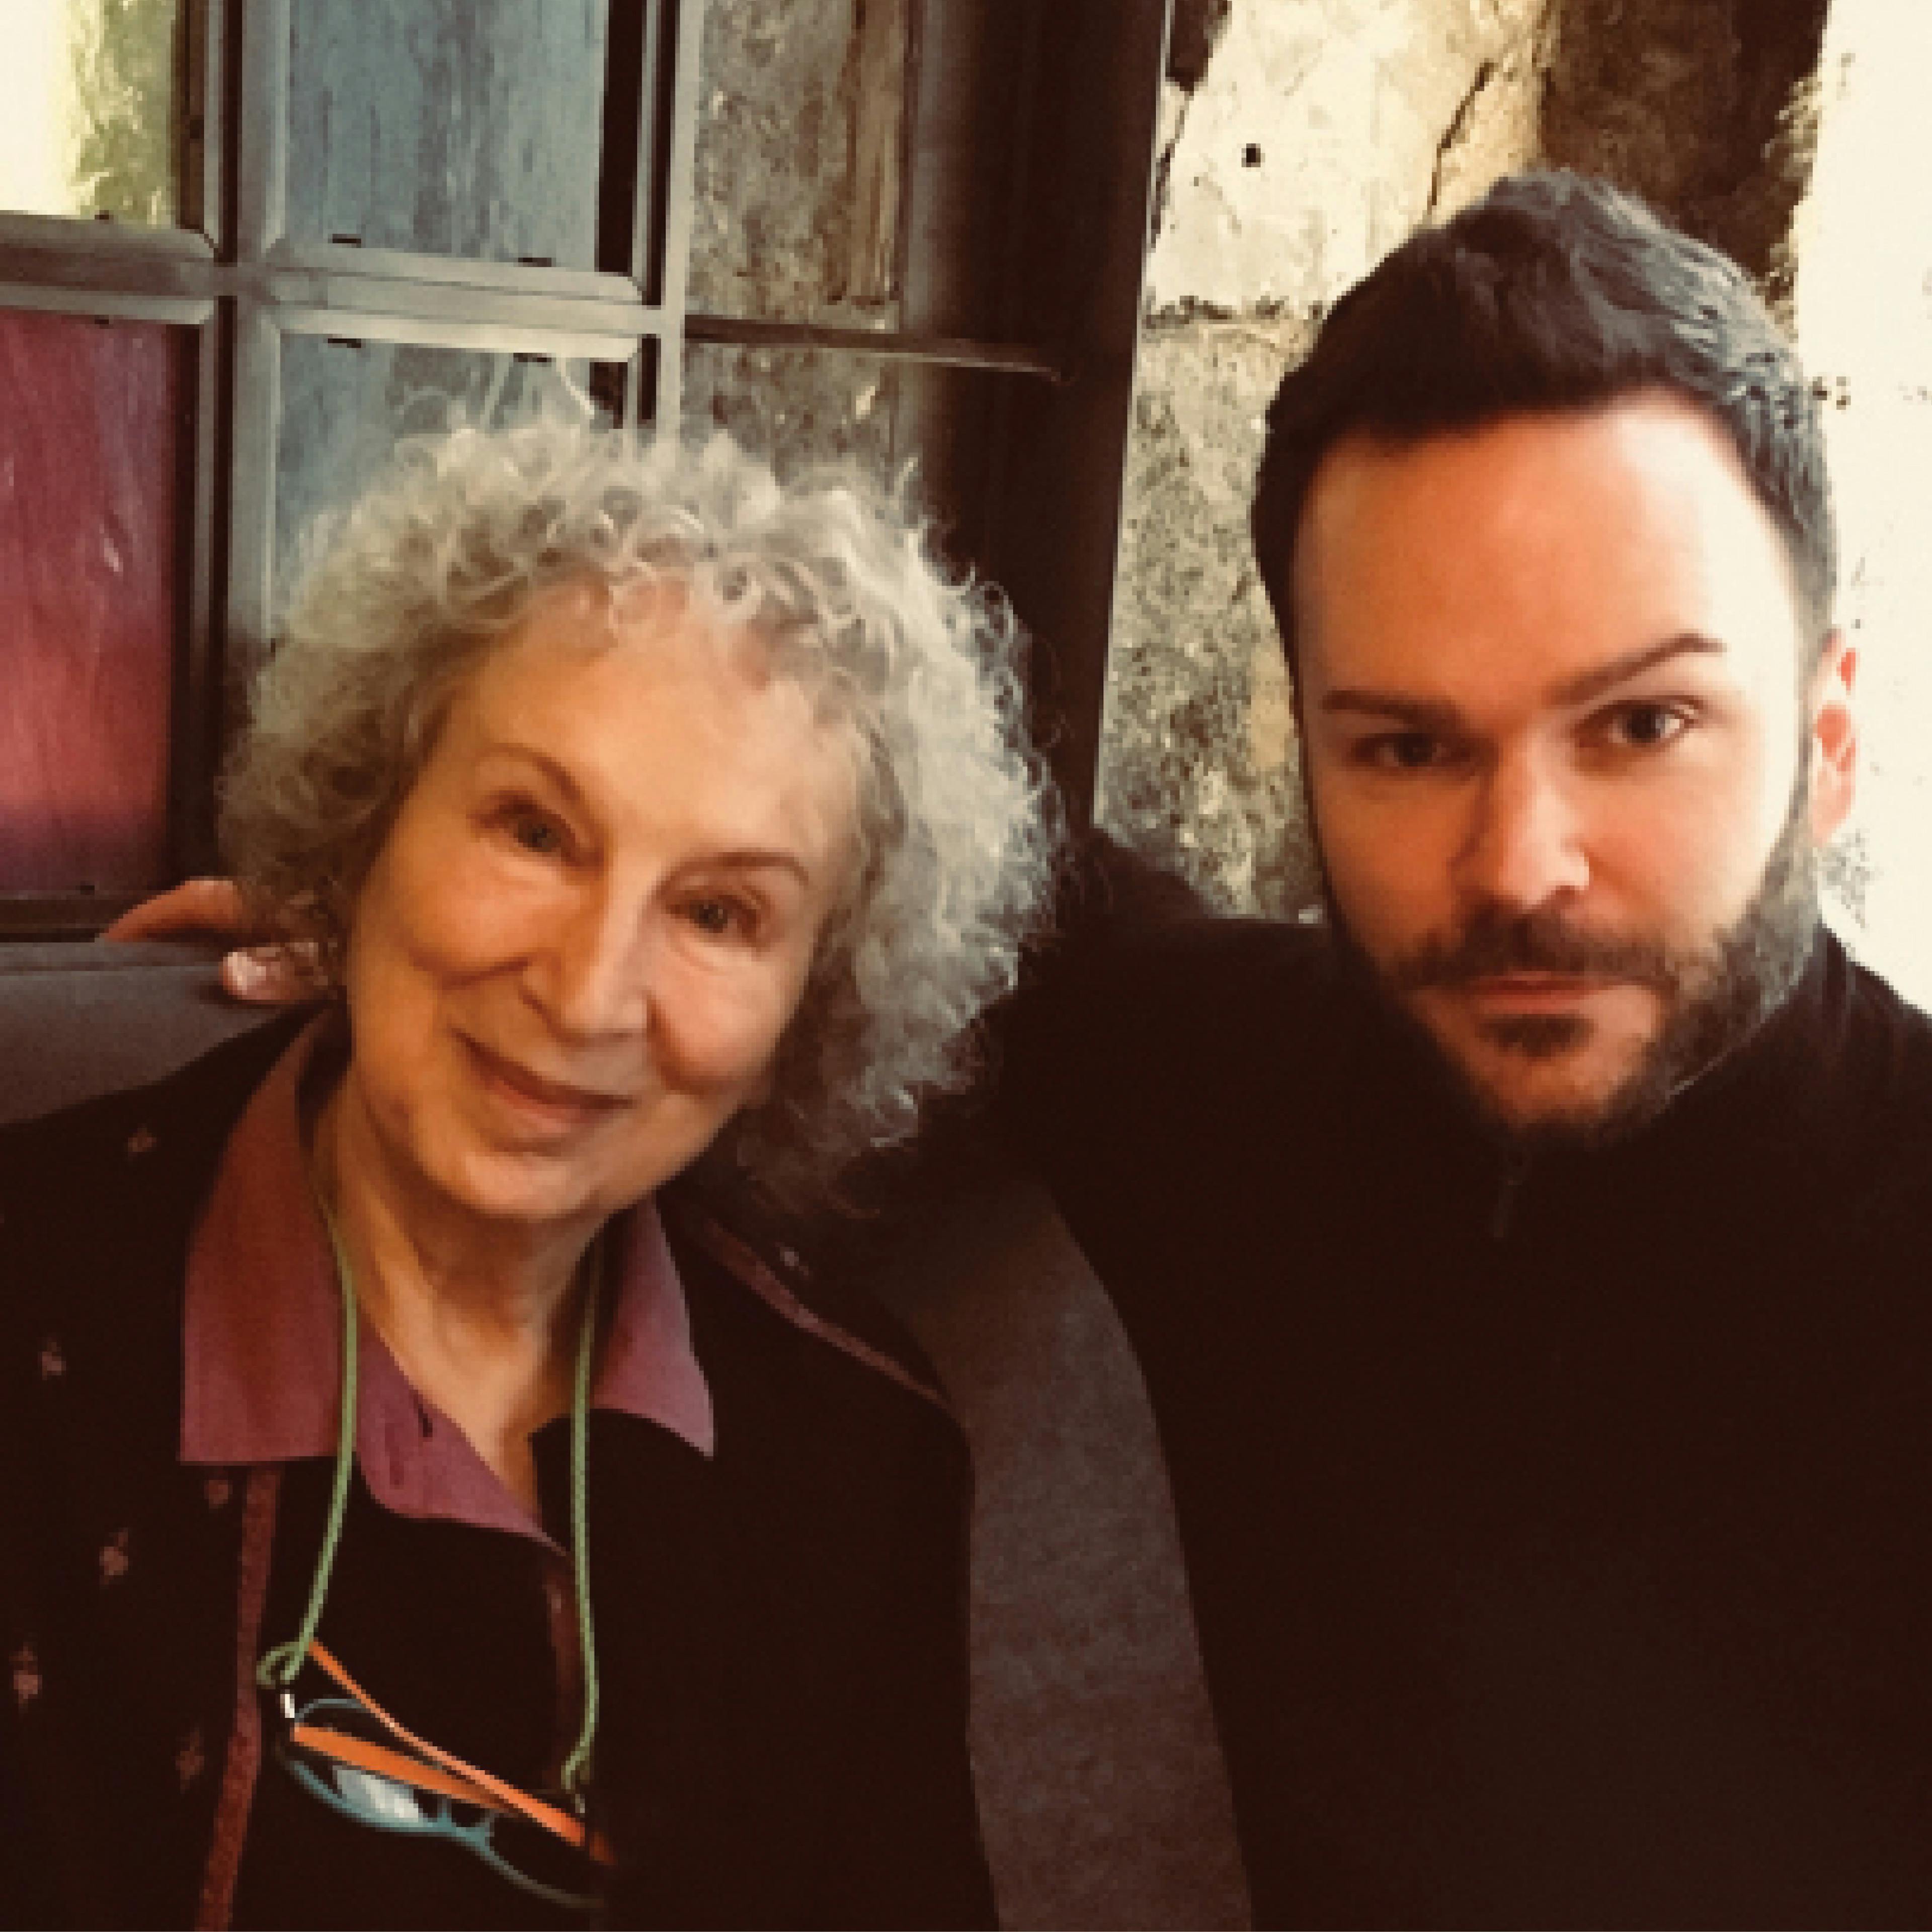 Joshua meets with author Margaret Atwood (left) for the first time in New York City. PHOTO COURTESY OF JOSHUA HOPKINS.